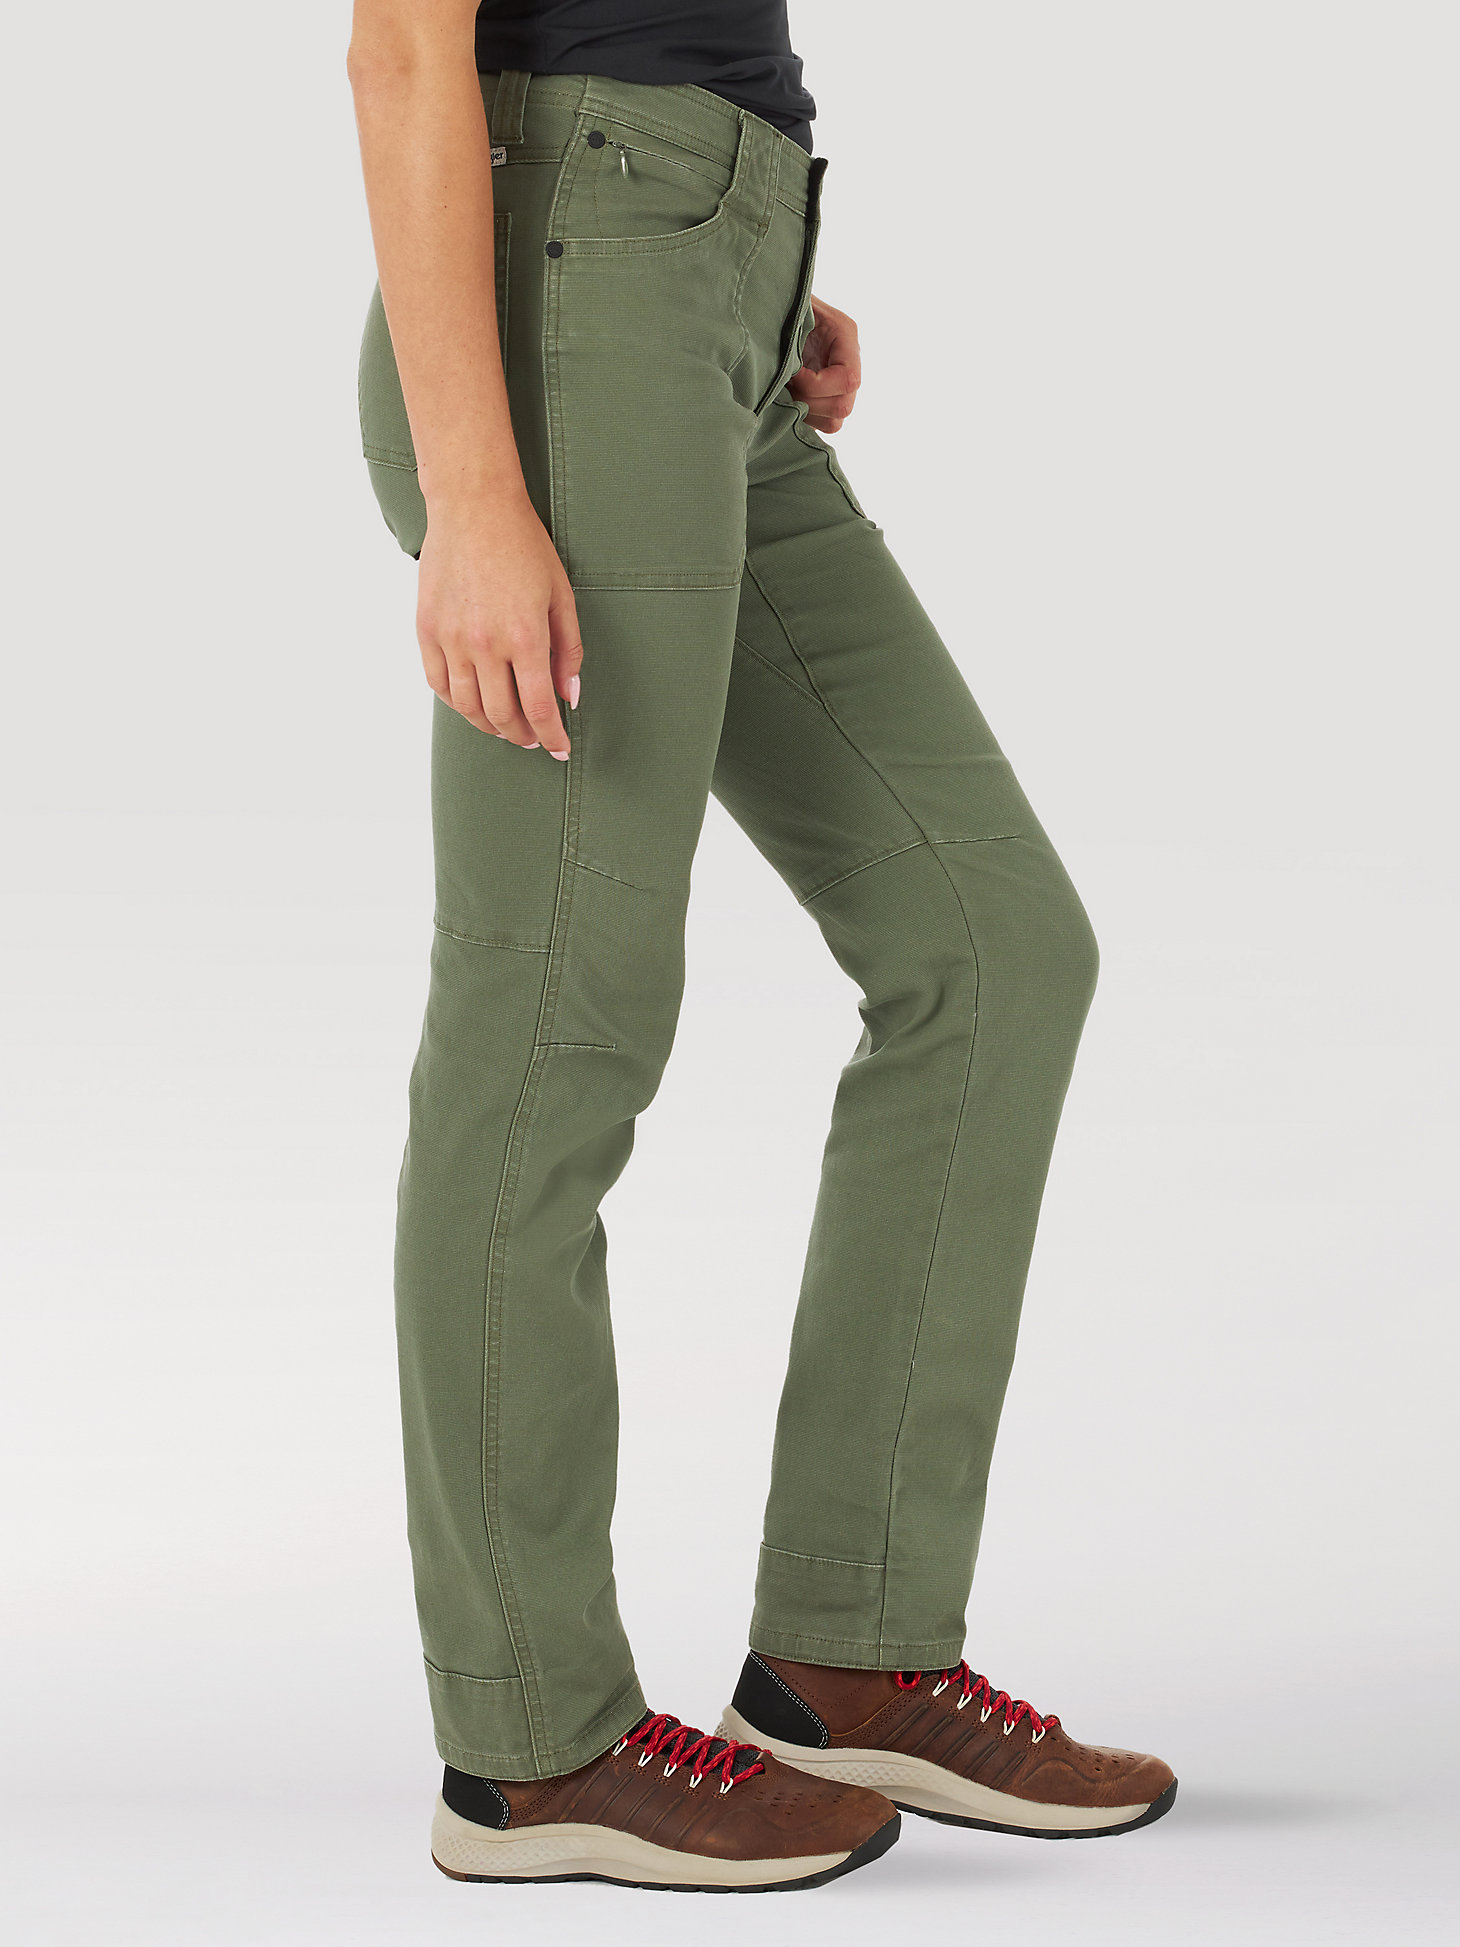 ATG By Wrangler™ Women's Canvas Pant in Olive alternative view 2